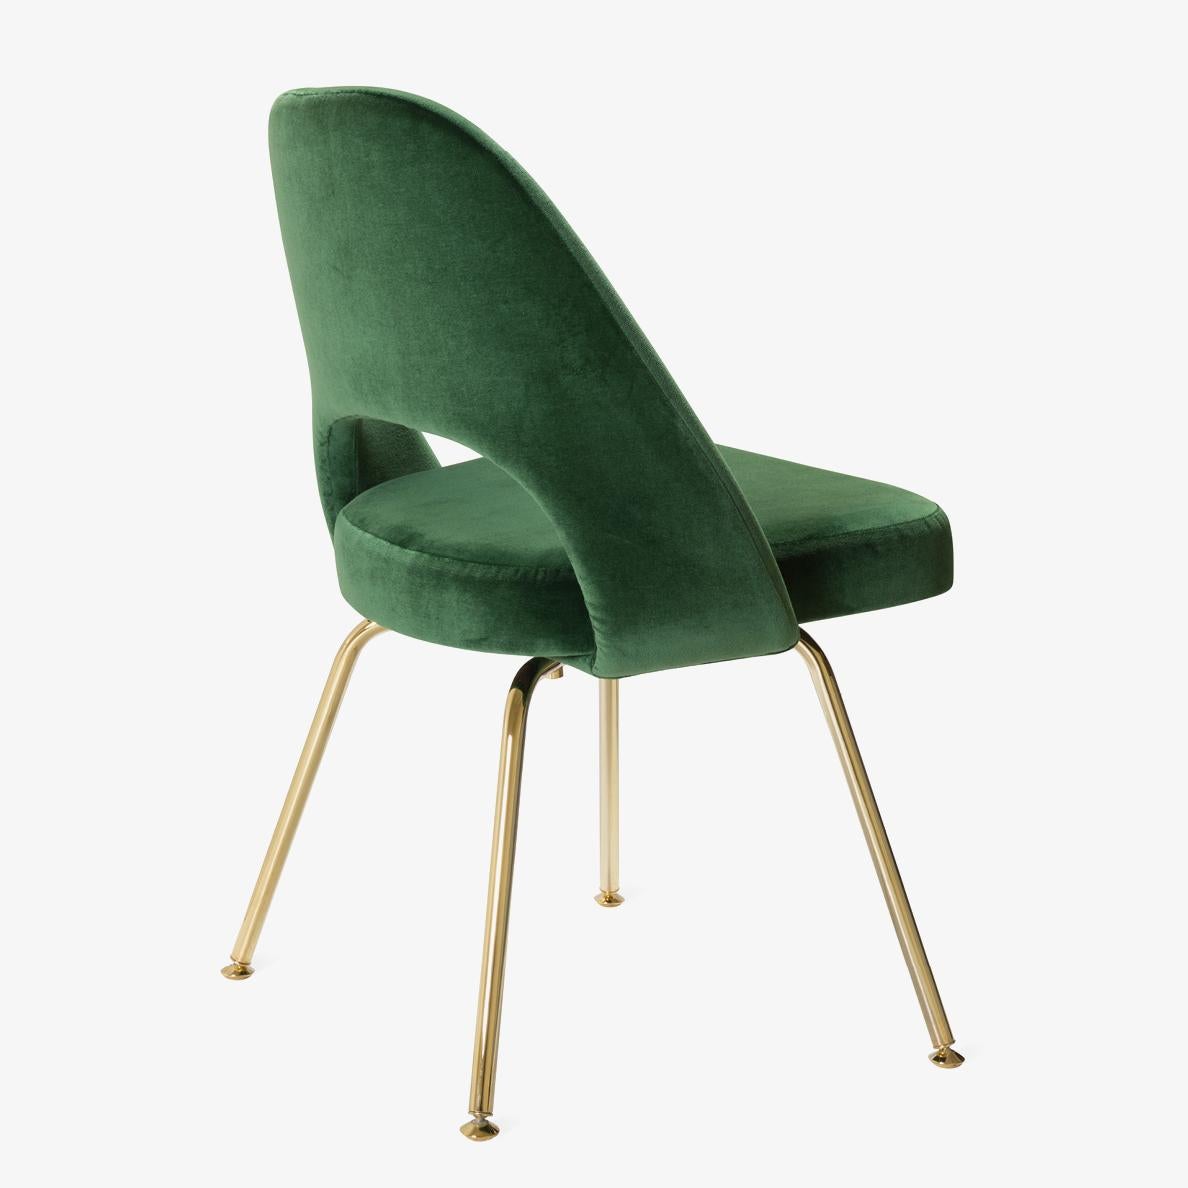 Edited by Montage, 100% authentic Eero Saarinen for Knoll Executive Armless Chairs completely restored ground-up with an extra touch of gold. Our Gold Edition features the chair body reupholstered with stunning emerald velvet and tubular steel legs